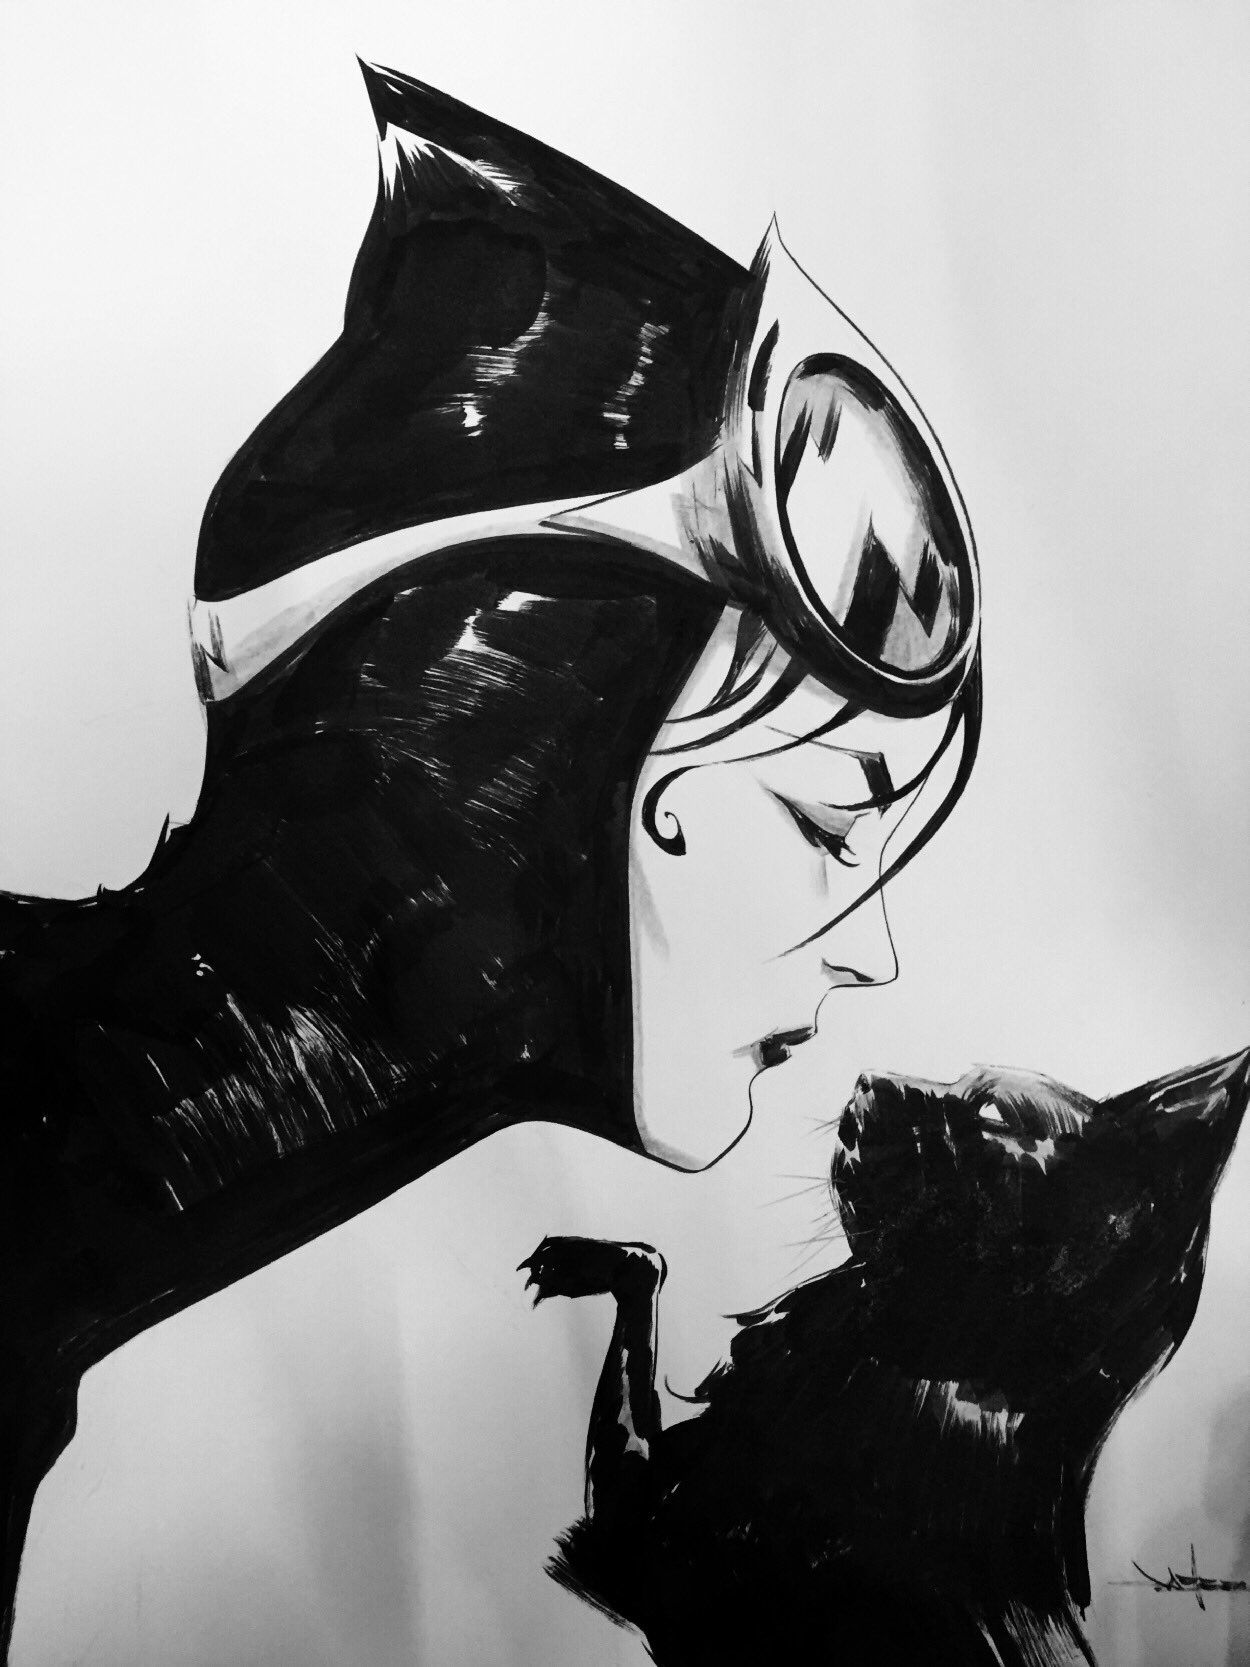 Catwoman by Jae Lee https://t.co/CW8cynrX0R